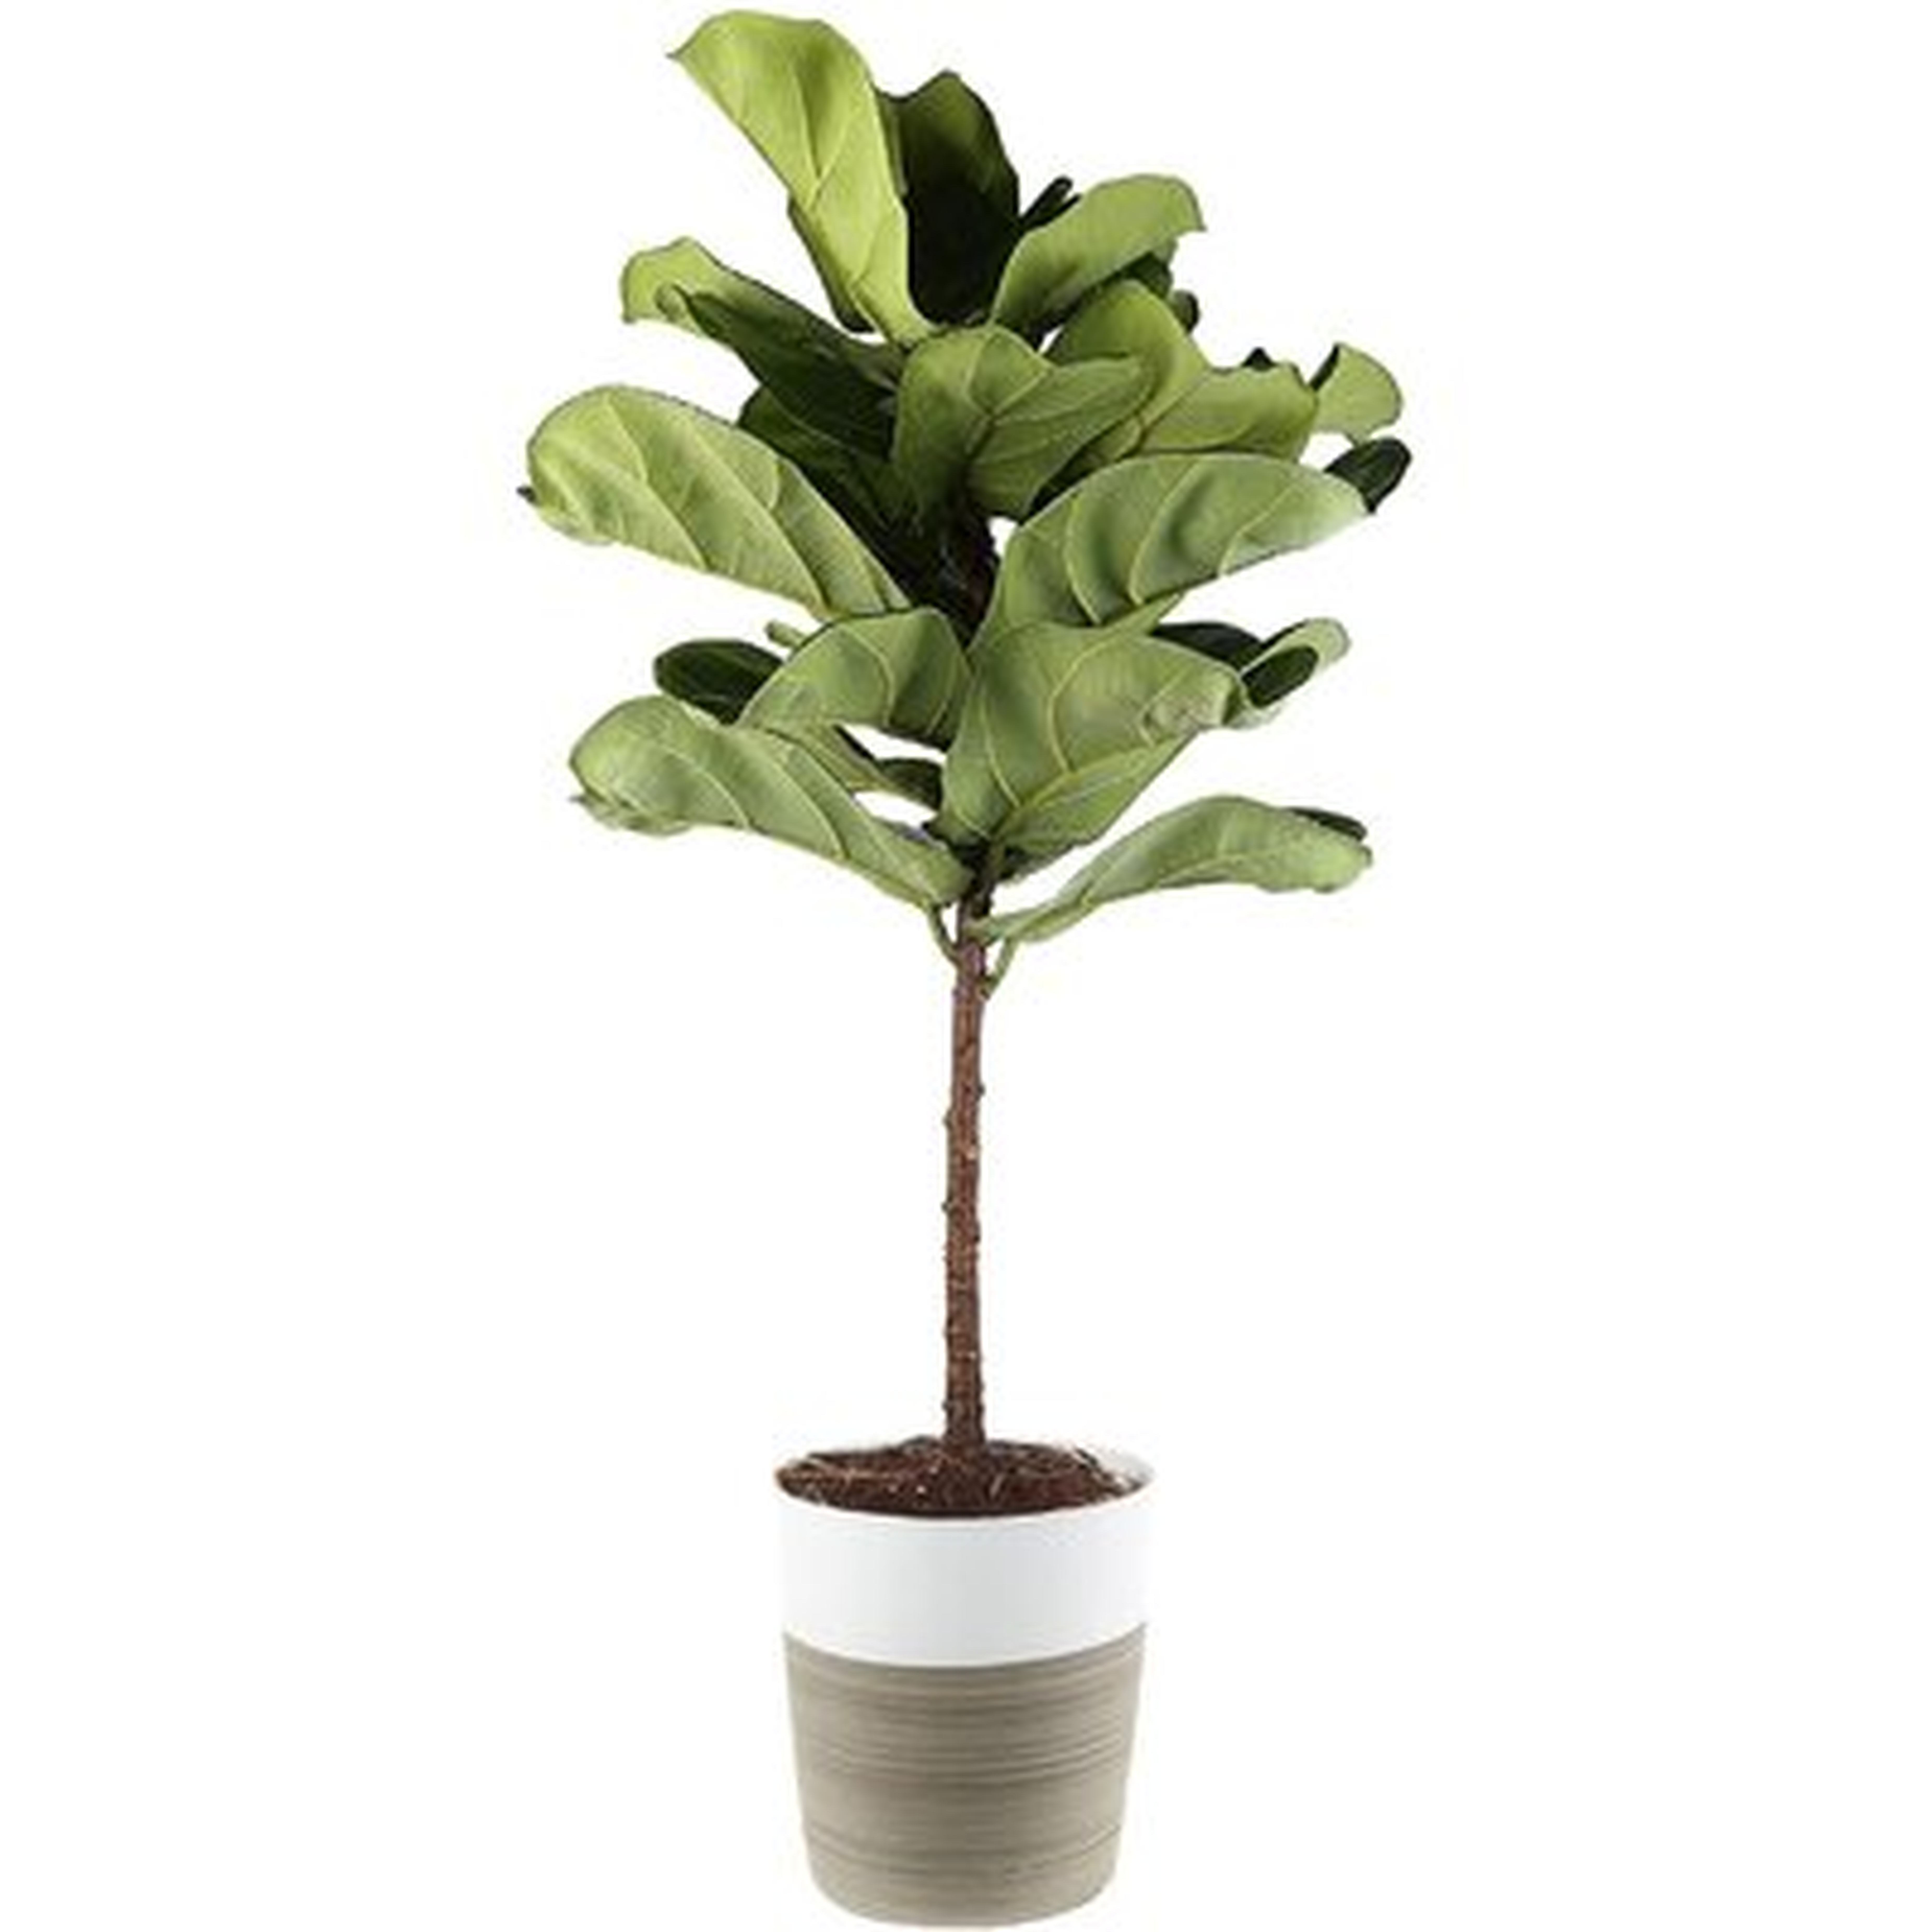 Live Indoor Ficus Lyrata, Fiddle Leaf Fig Tree - Floor Plant - Fresh From Our Farm, 4-Feet, In White-Natural Decor Planter - Wayfair